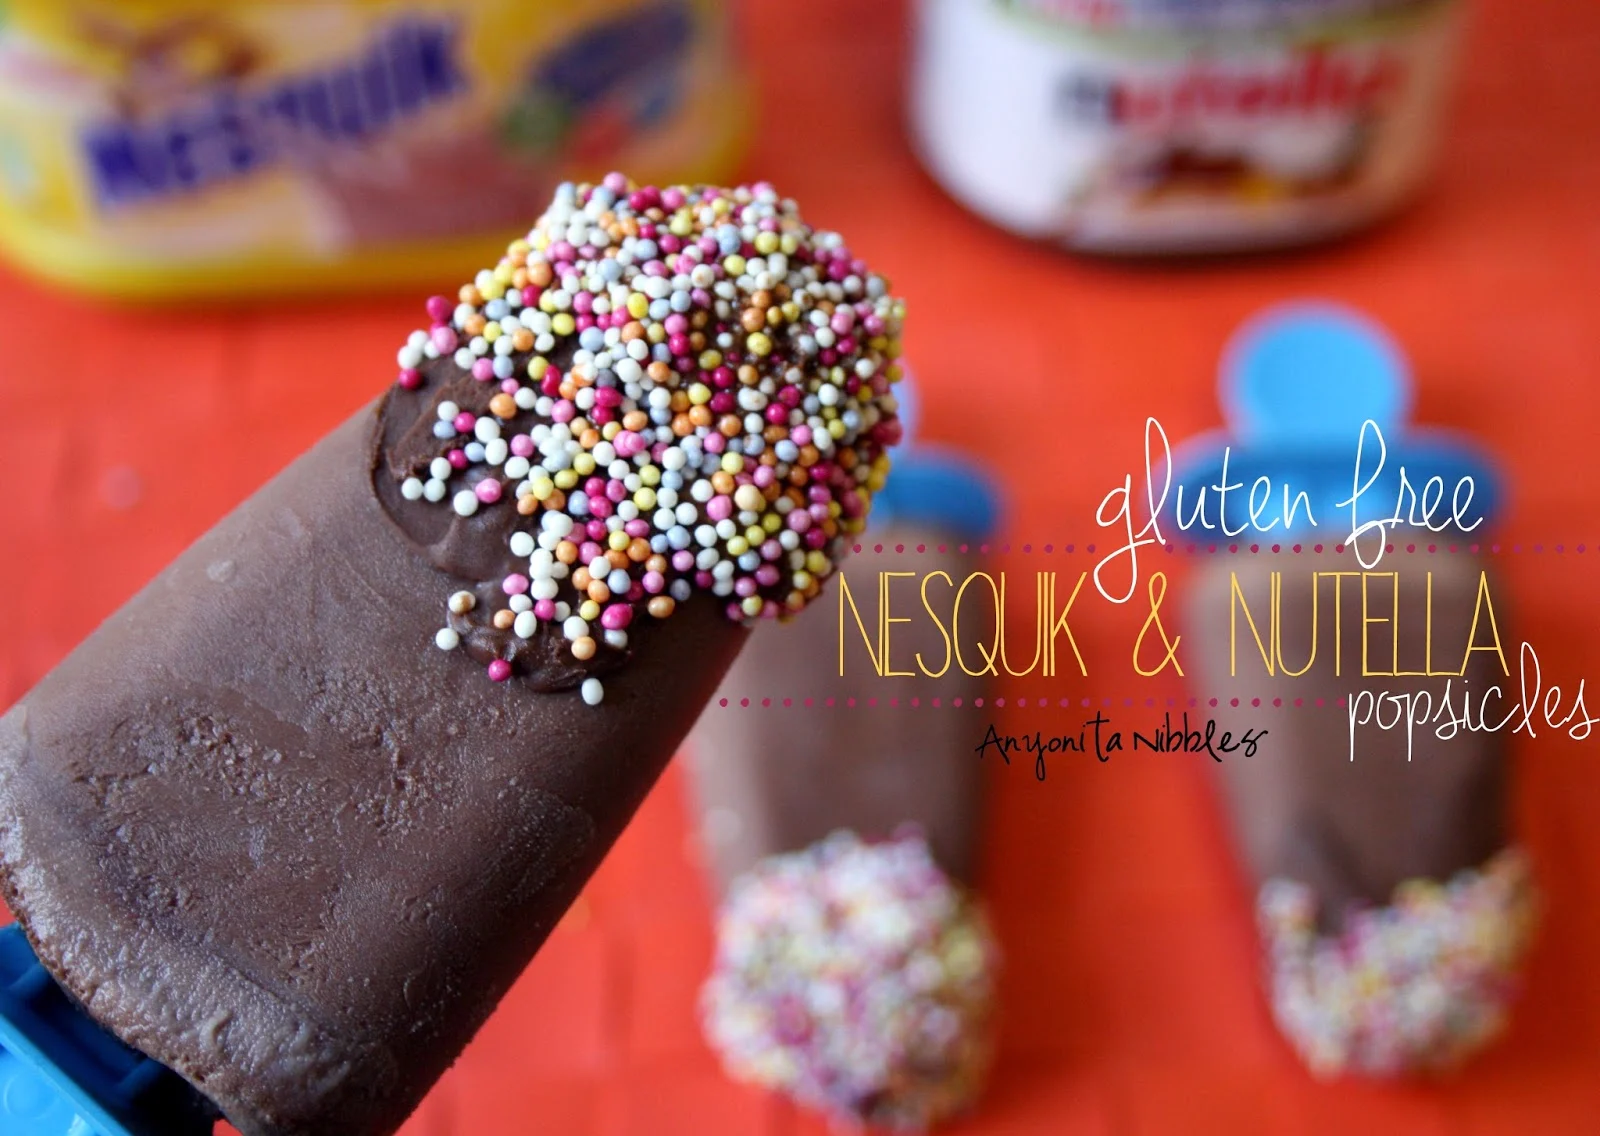 Gluten Free Nesquik & Nutella Popsicles from Anyonita Nibbles